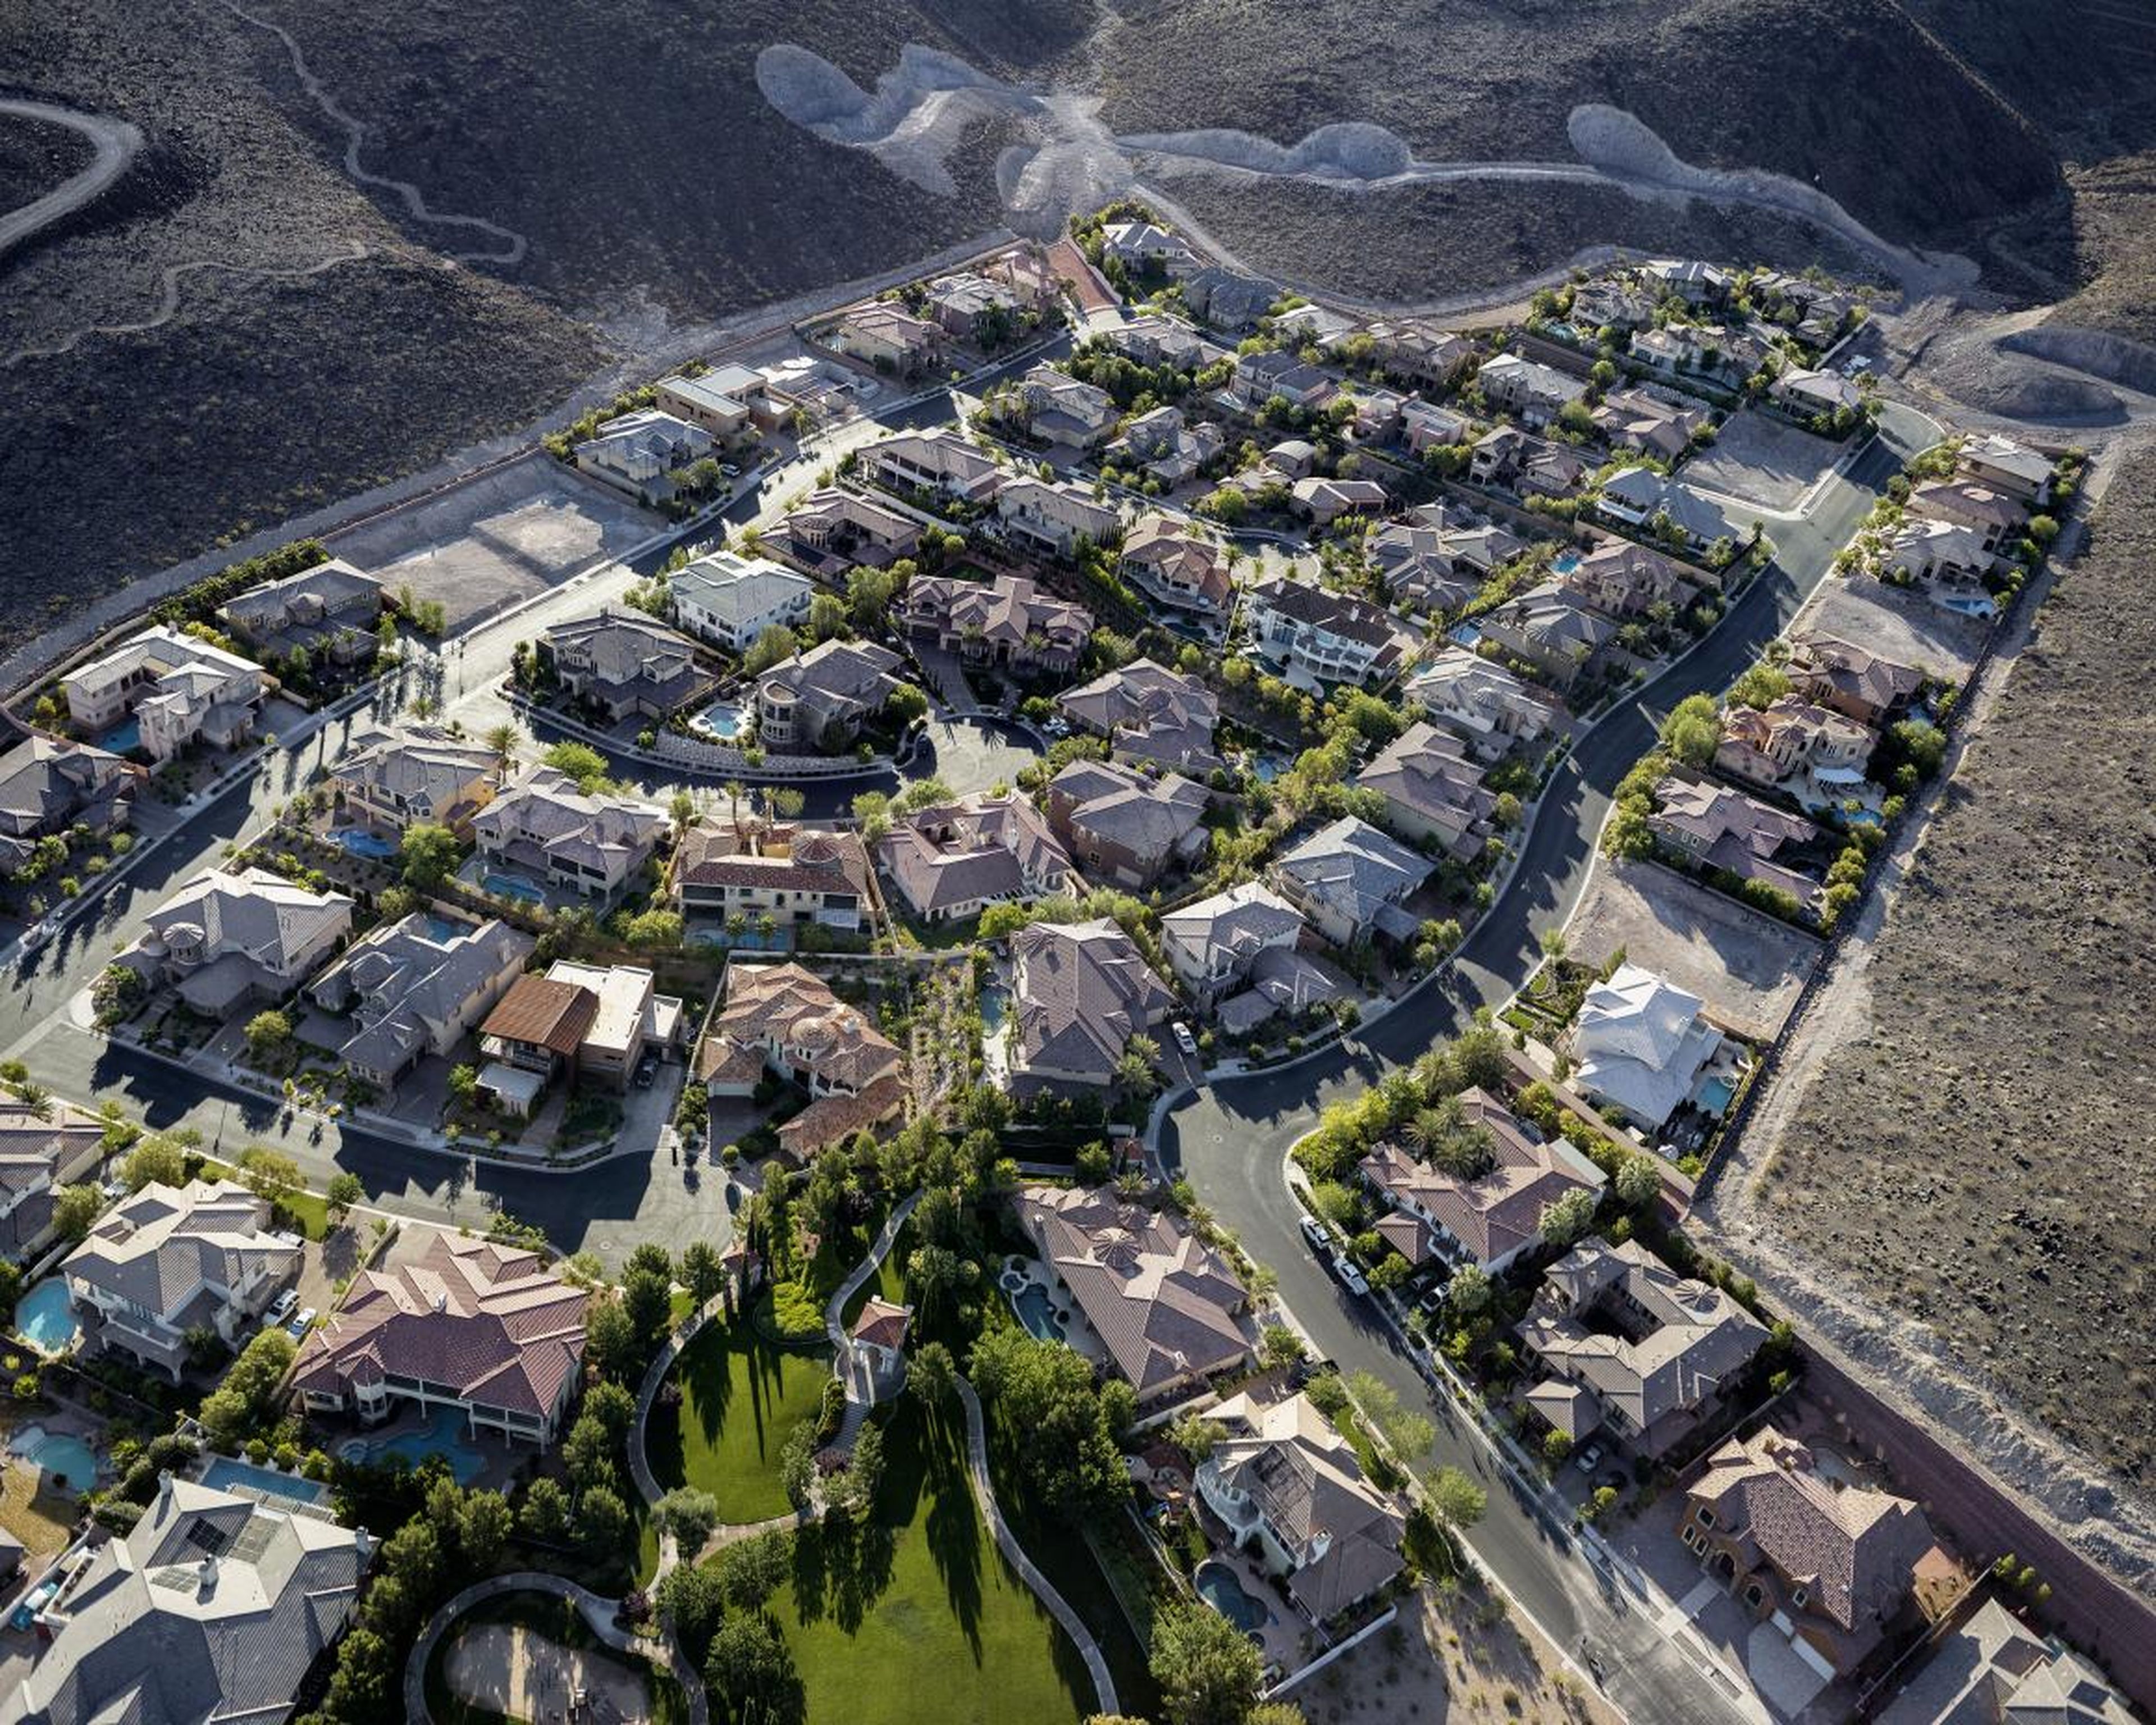 This image, an aerial view of a gated community in Henderson, Nevada, brought the question of sustainability to Little's mind. This image "talks about the environmental effects of privilege. It takes a lot of water to make that